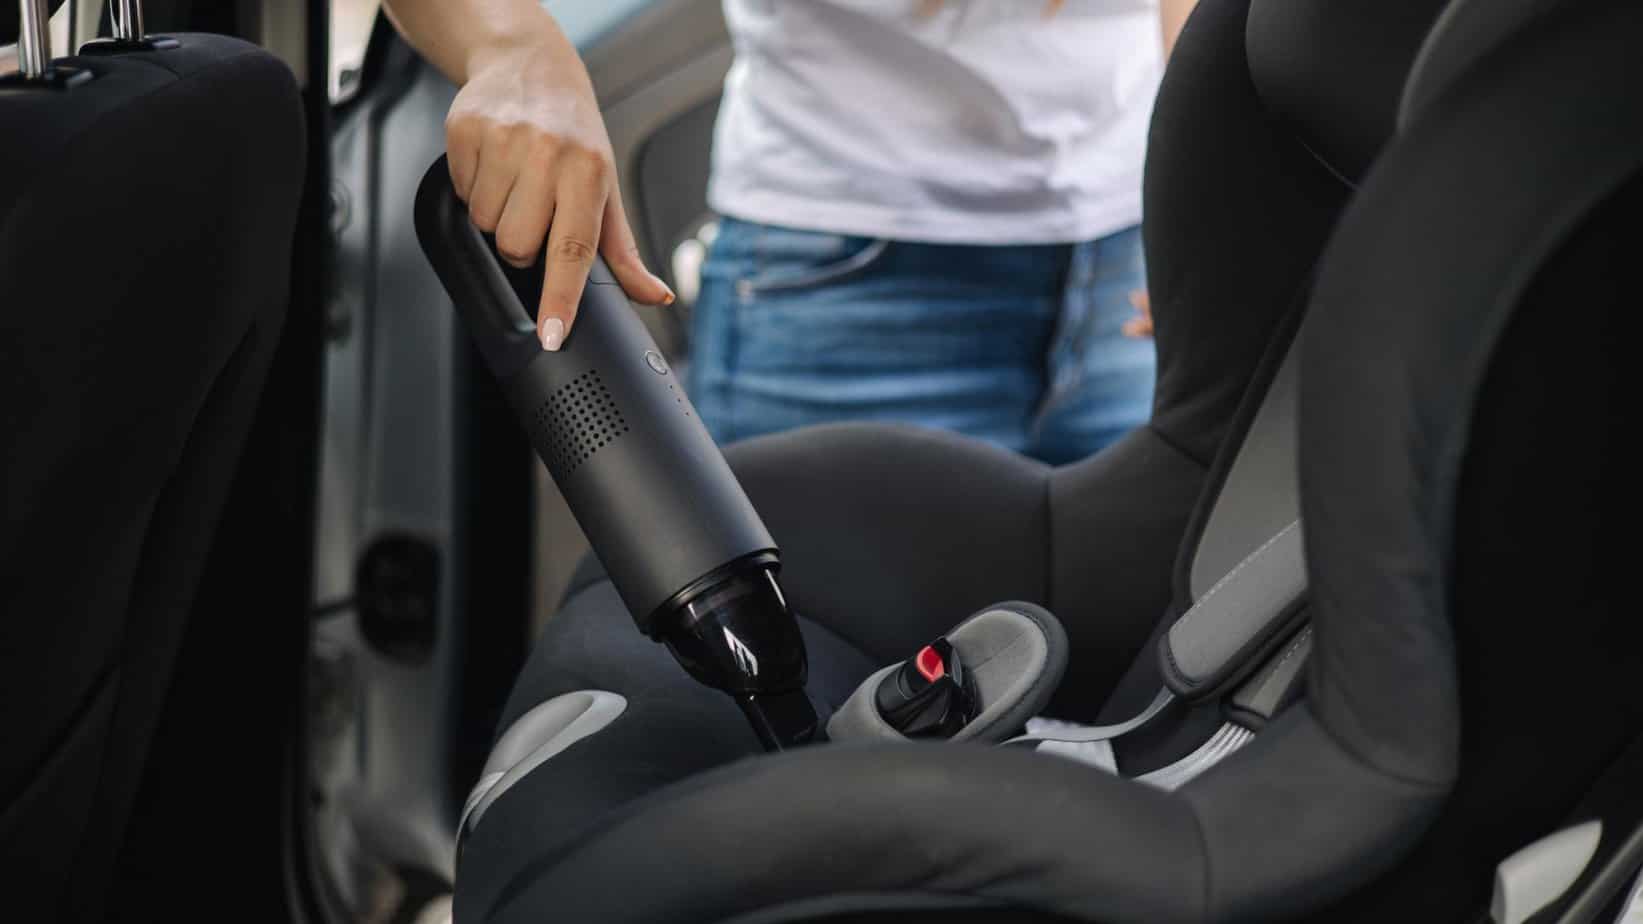 How To Clean Baby Car Seats